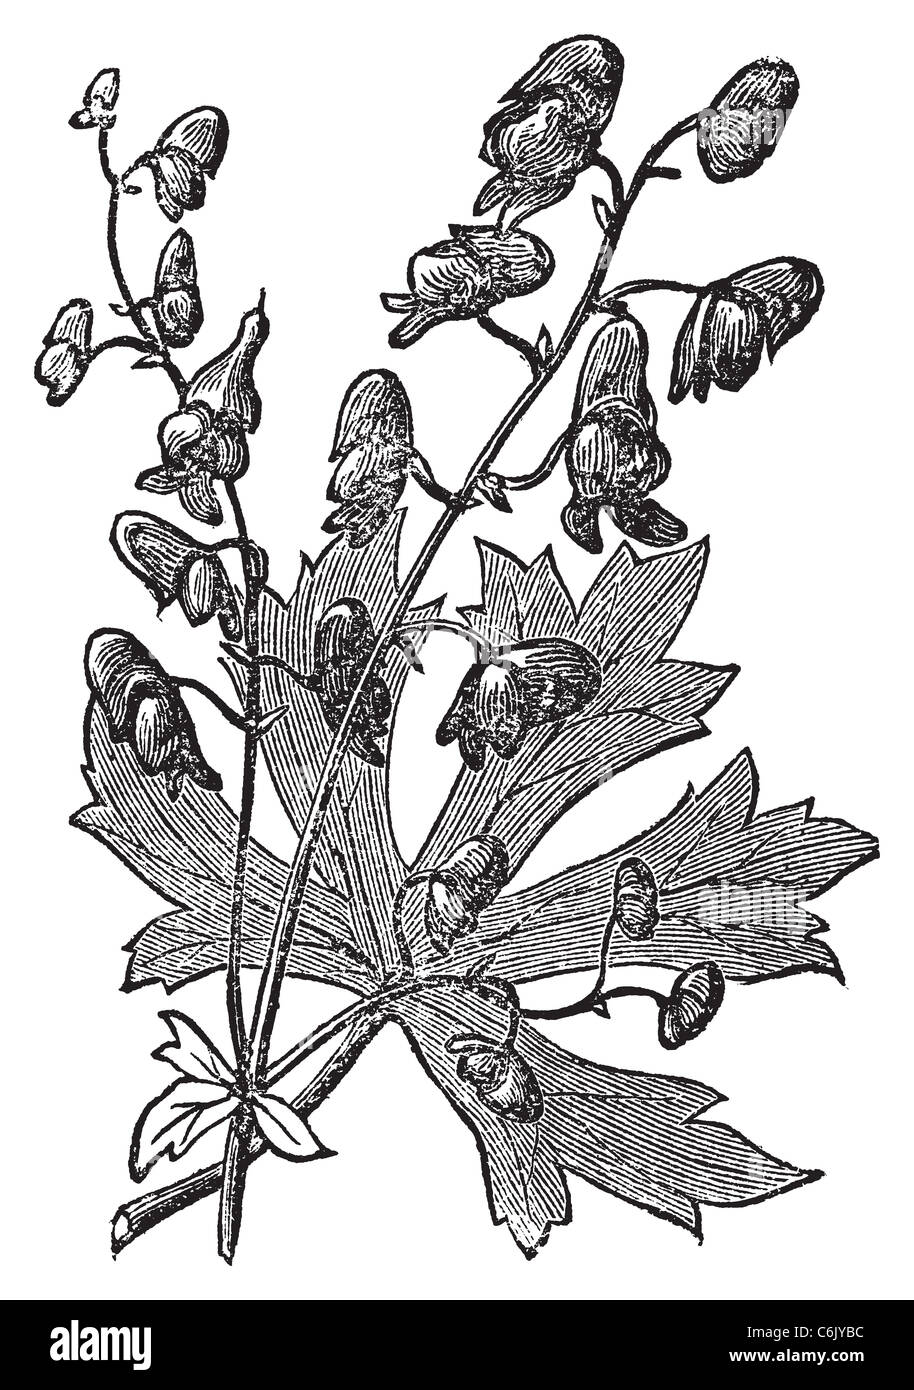 Monkshood or Aconitum napellus engraved illustration. Also known as aconite, Wolf's Bane, Monk's Hood. Old vintage plant etching Stock Photo